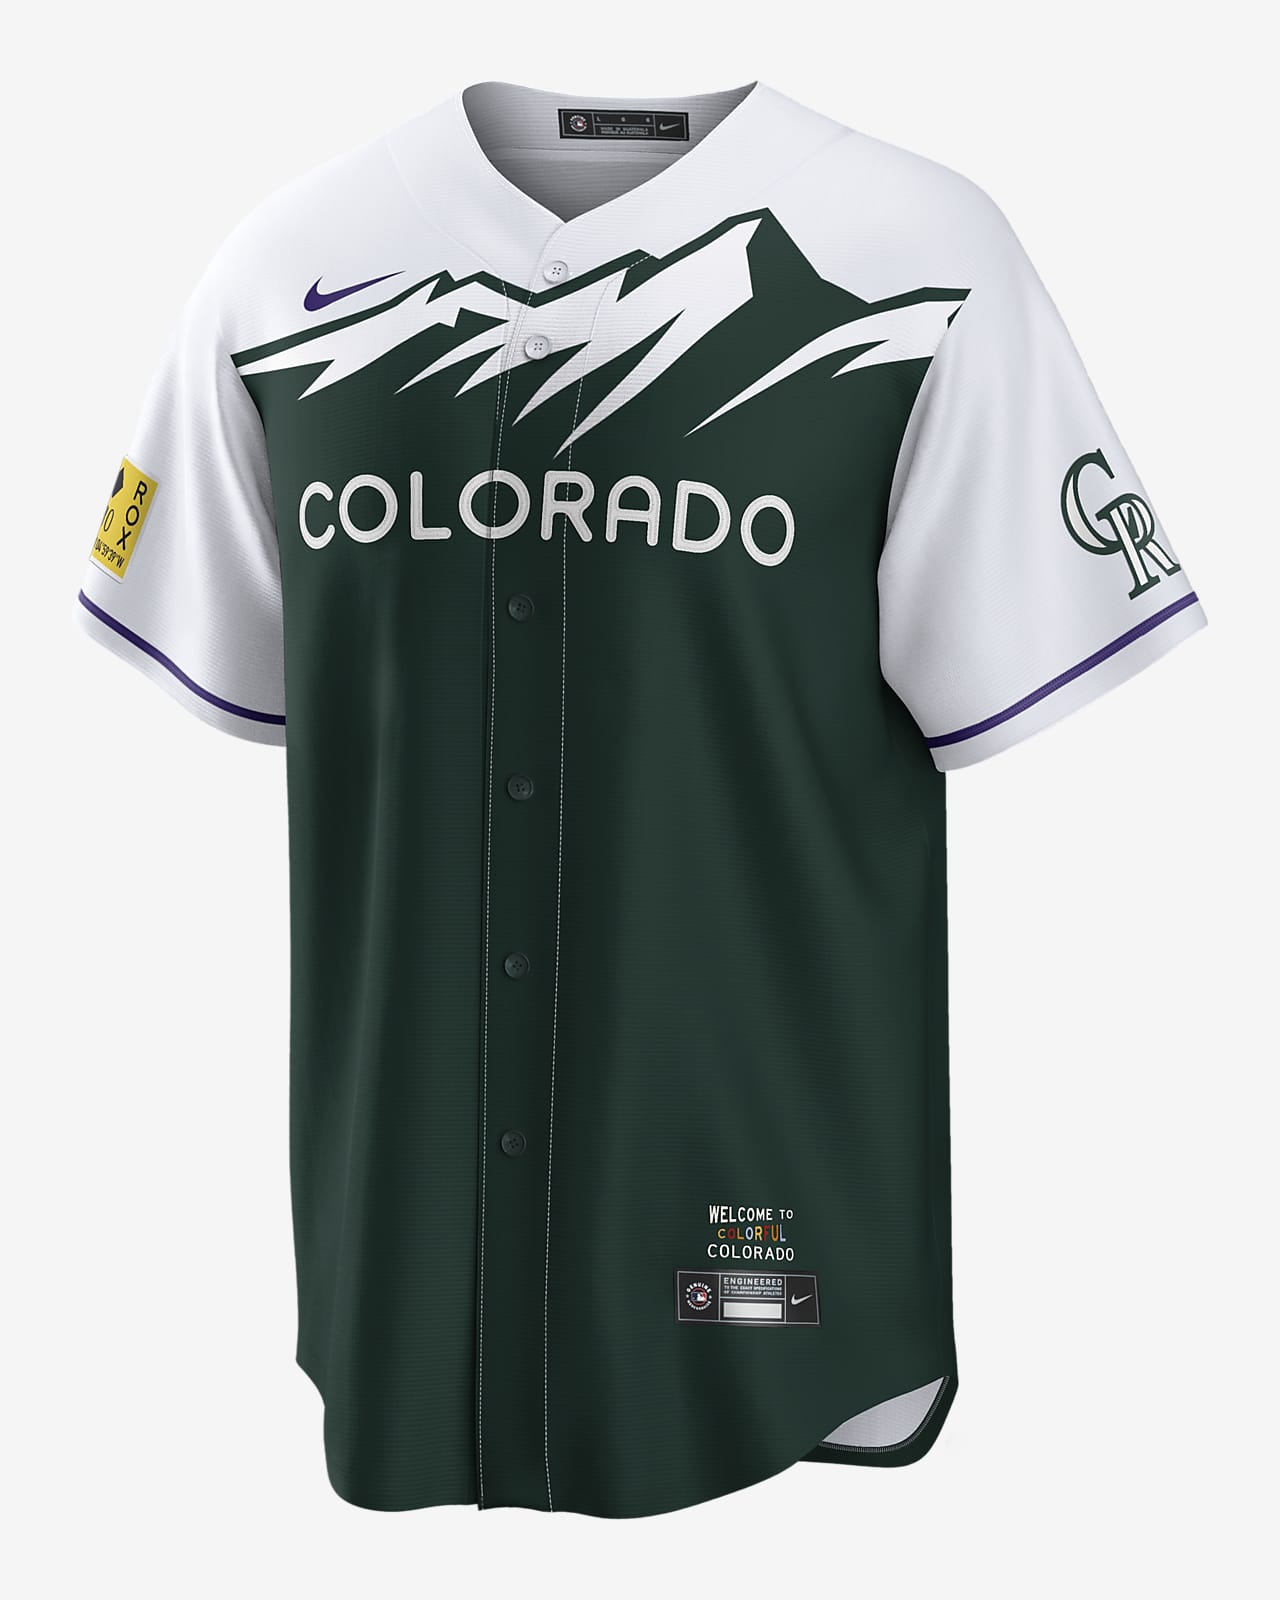 upcoming city connect jerseys